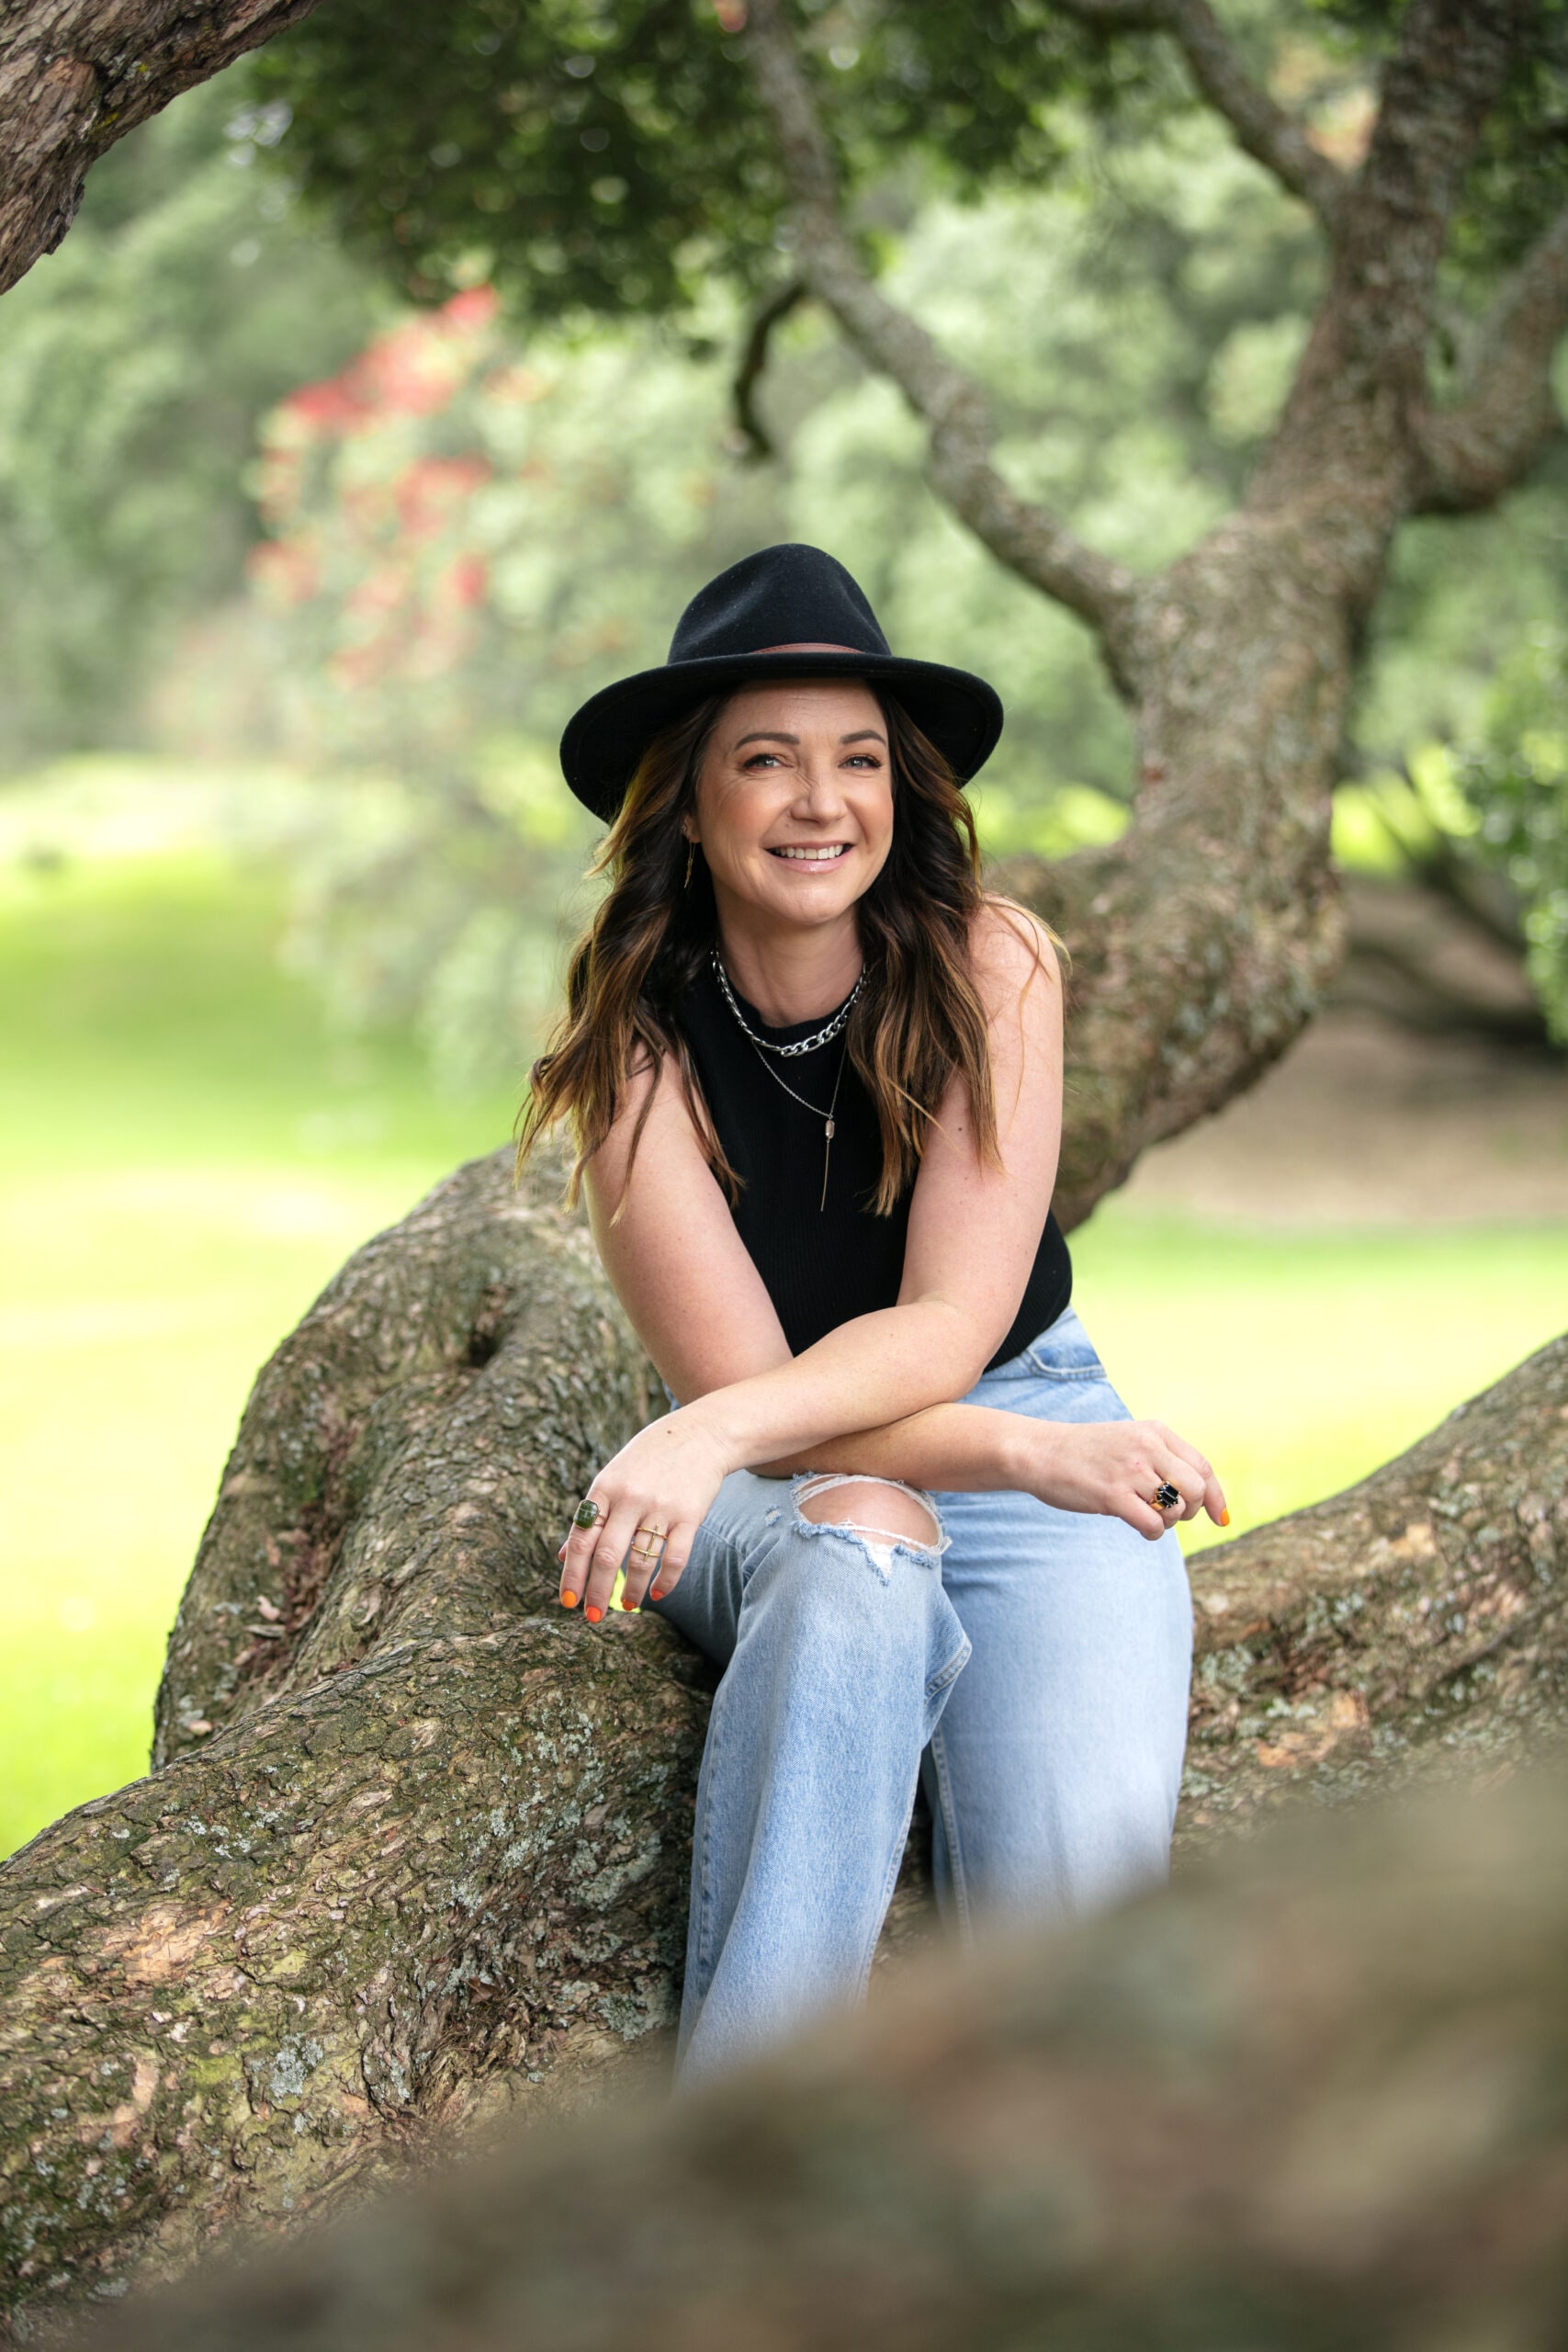 Claire Chitham wearing black hat and top while sitting on tree